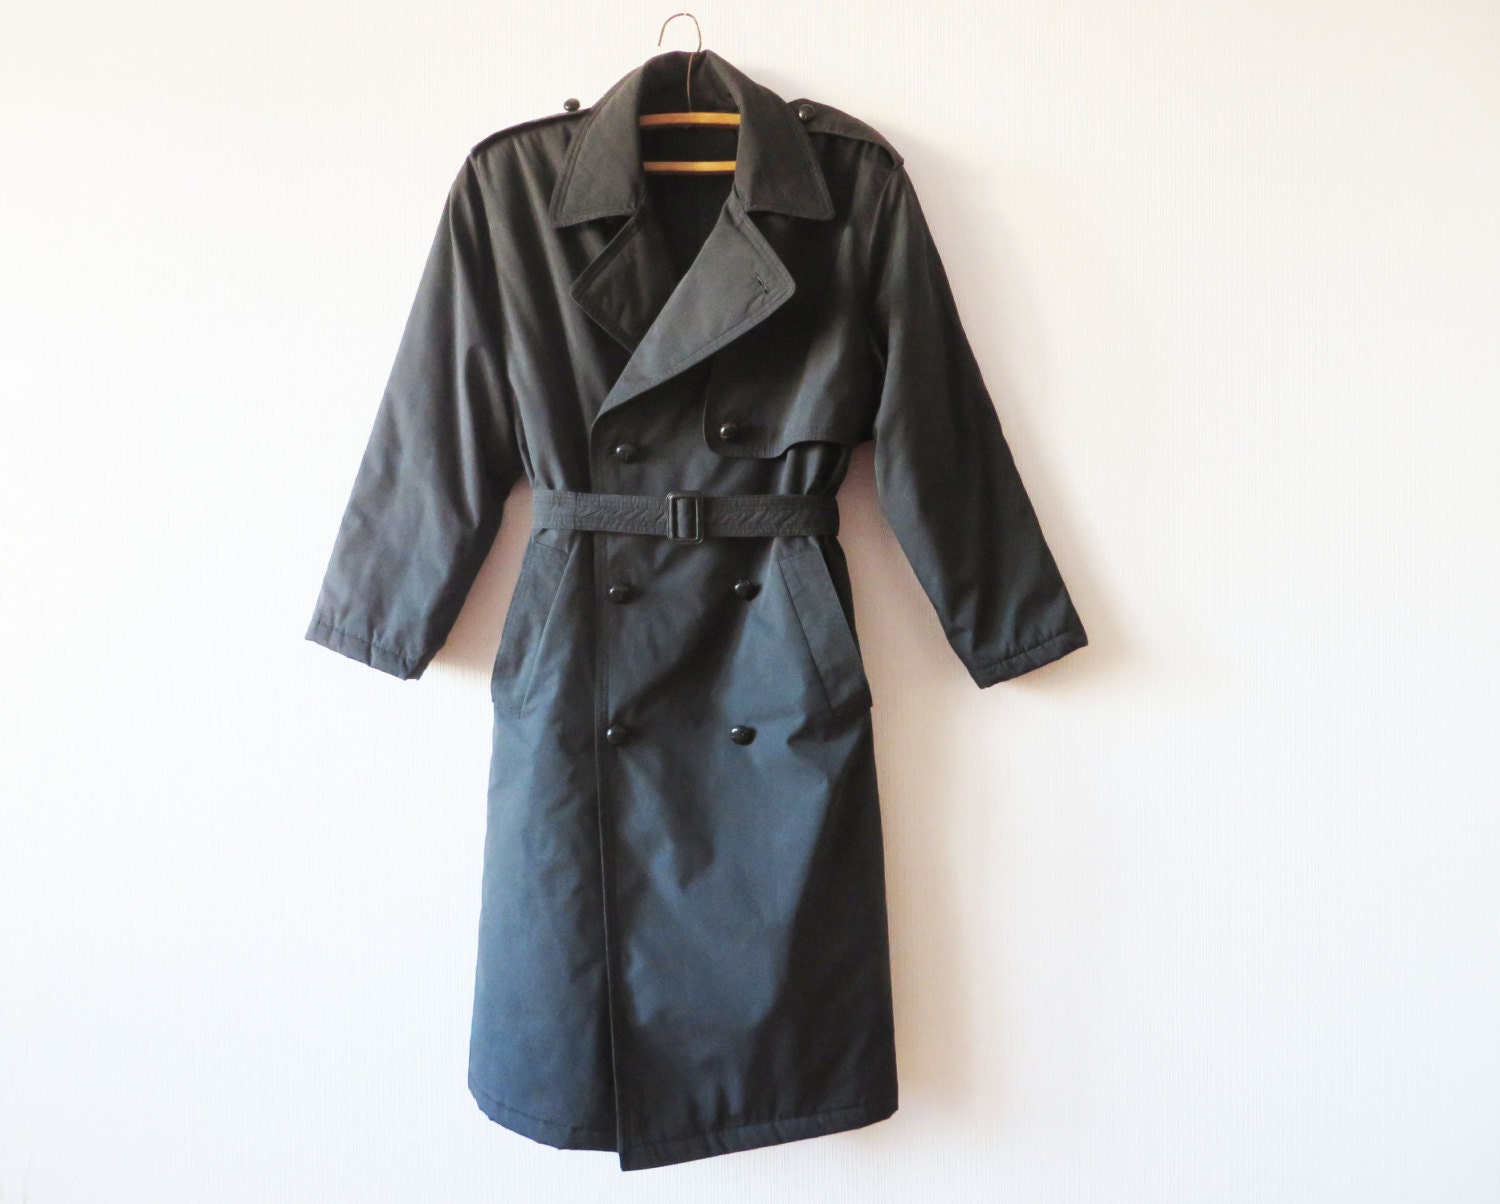 Classic Detective Men's Black Trench Coat Double Breasted